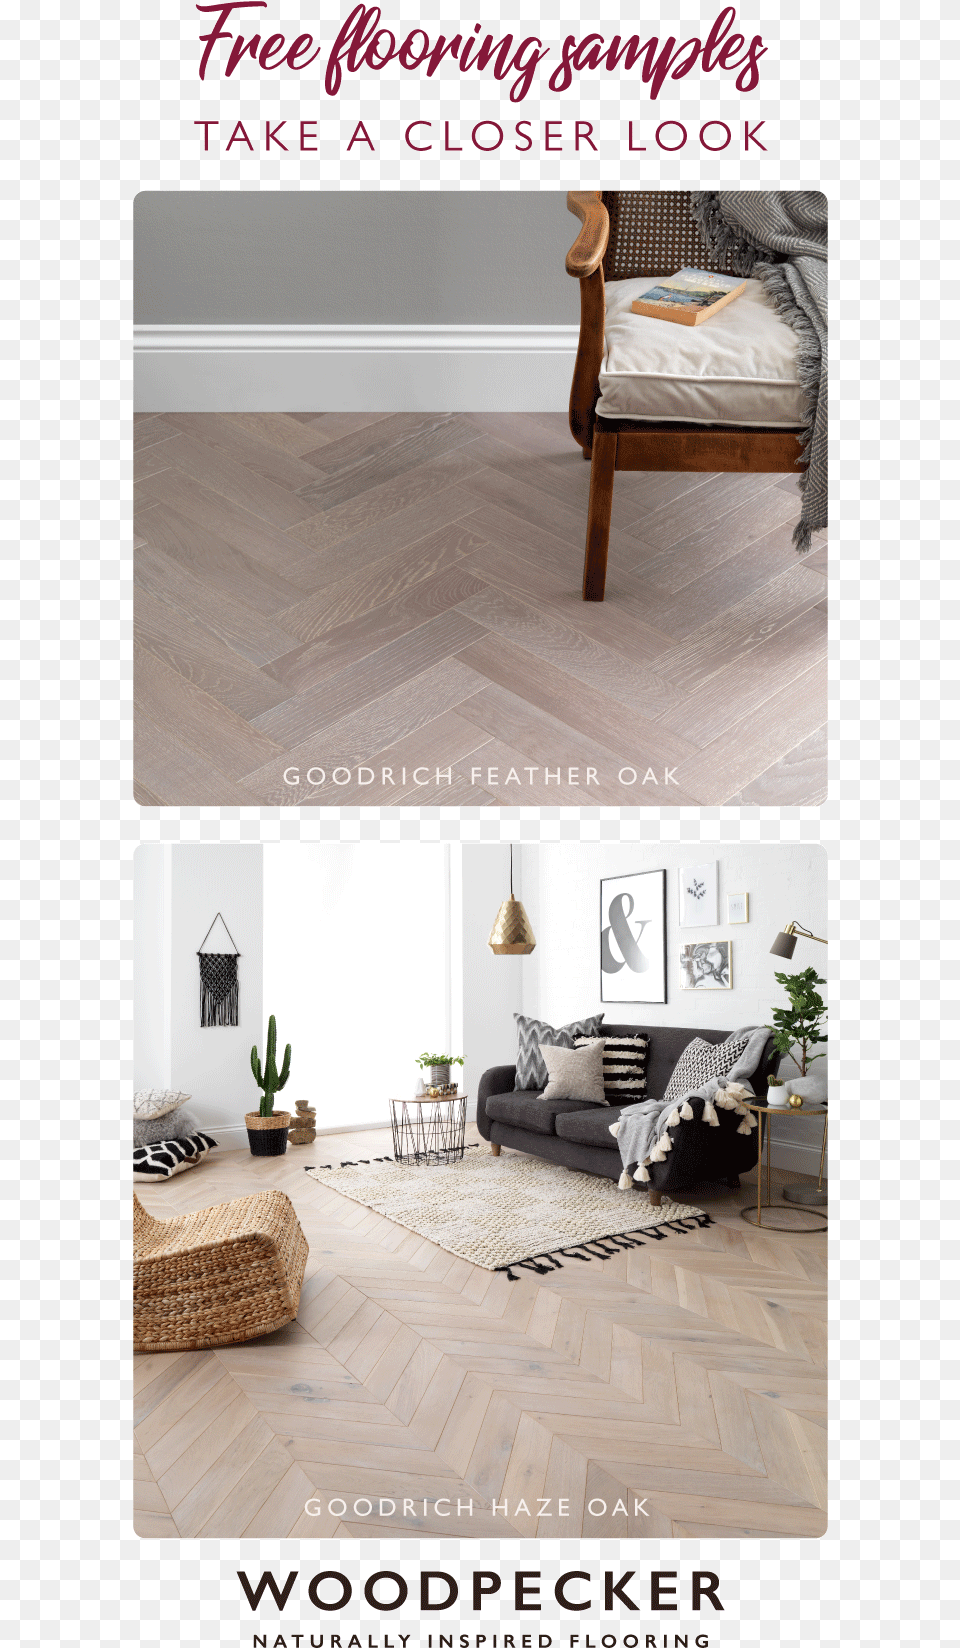 Take A Closer Look And Discover Your Dream Wood Floor Grey Lounge With Wood Floors, Interior Design, Indoors, Home Decor, Flooring Png